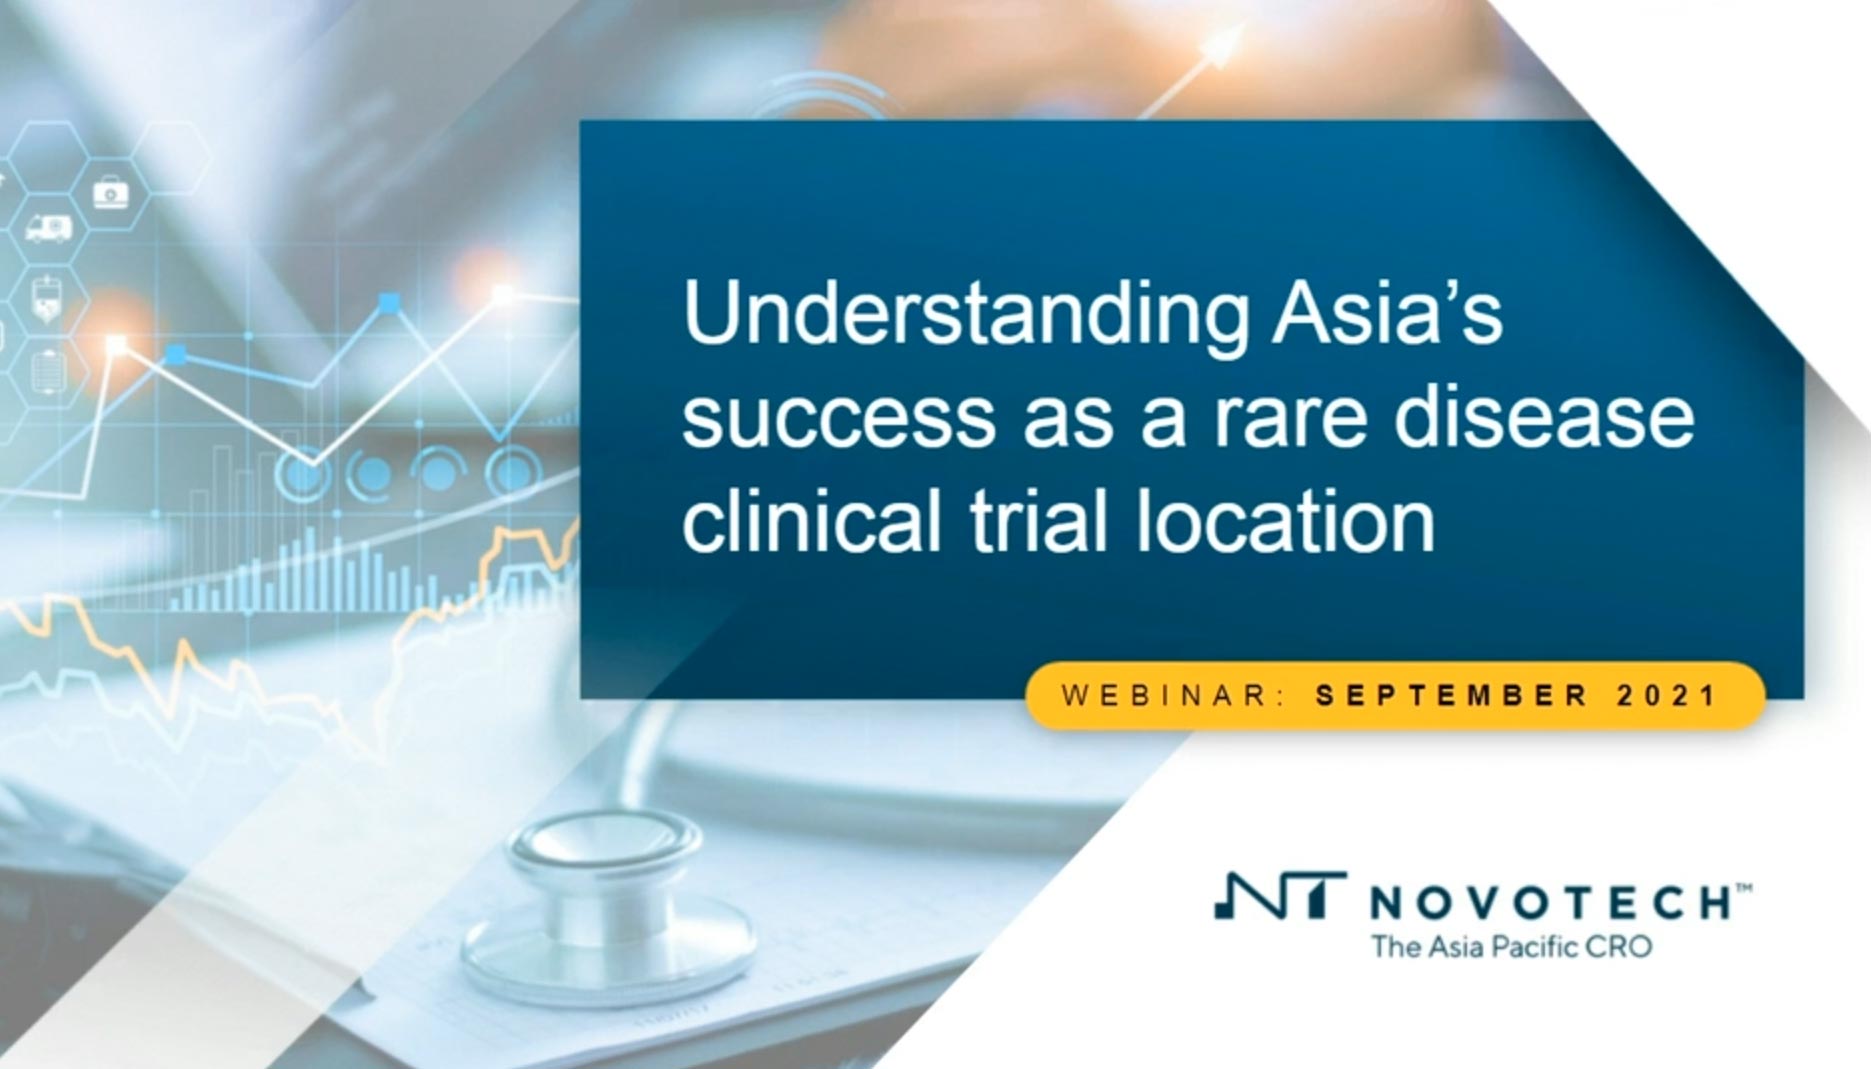 Accelerating Clinical Trials in Rare Disease